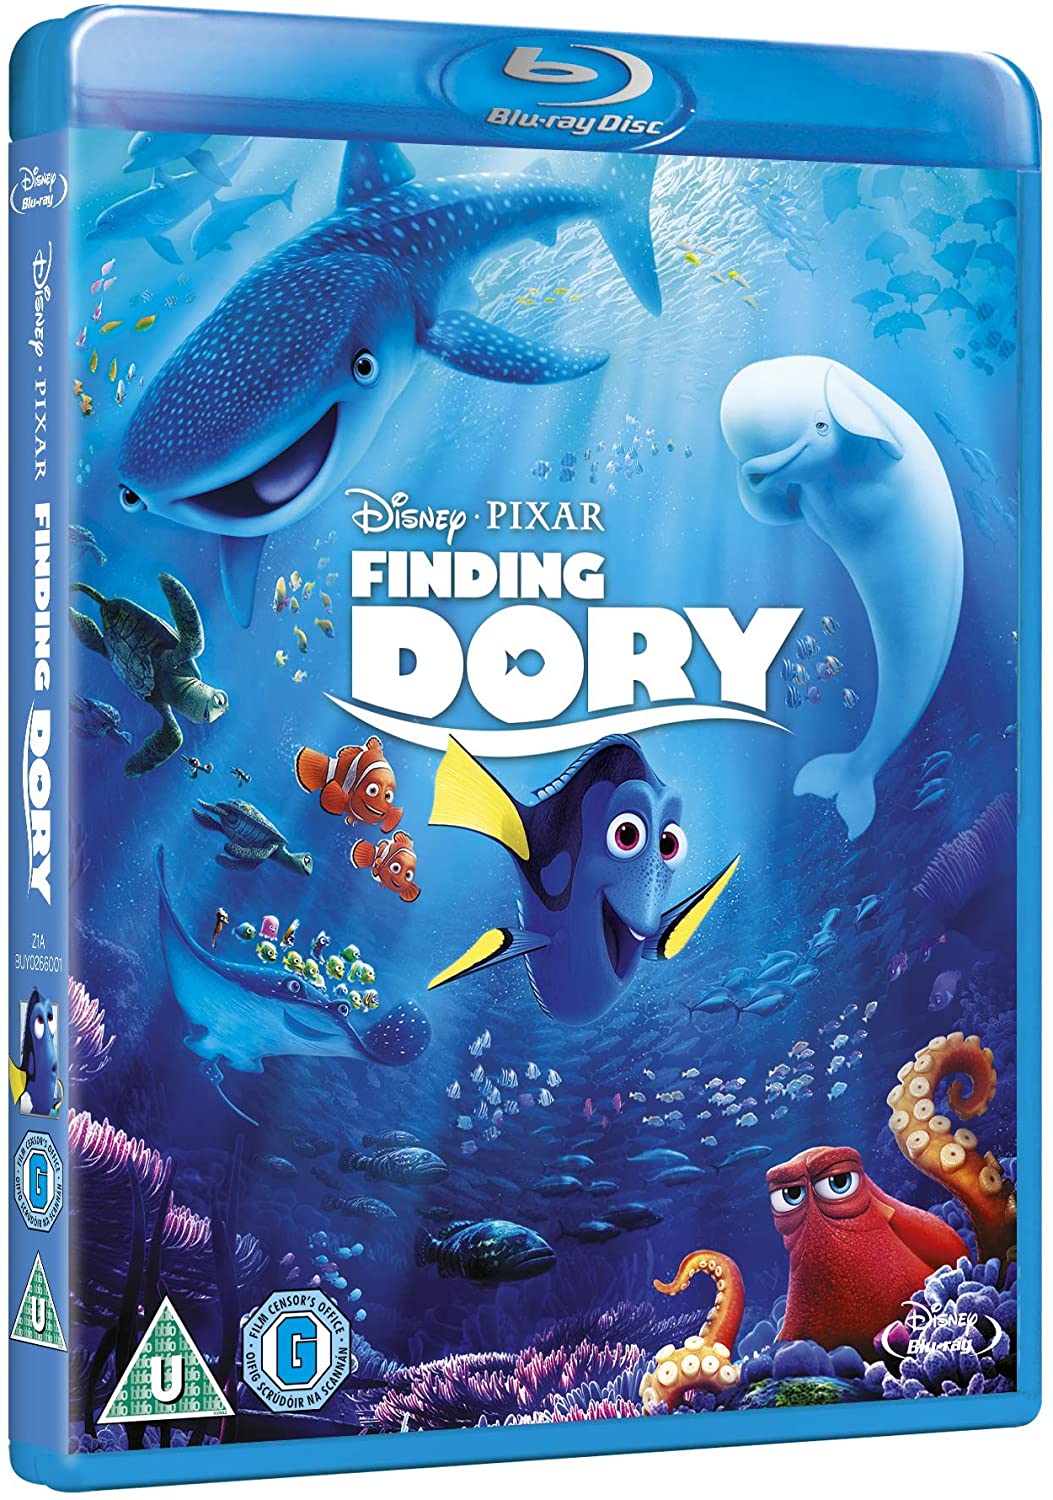 Dory finden [Blu-ray] [2017]